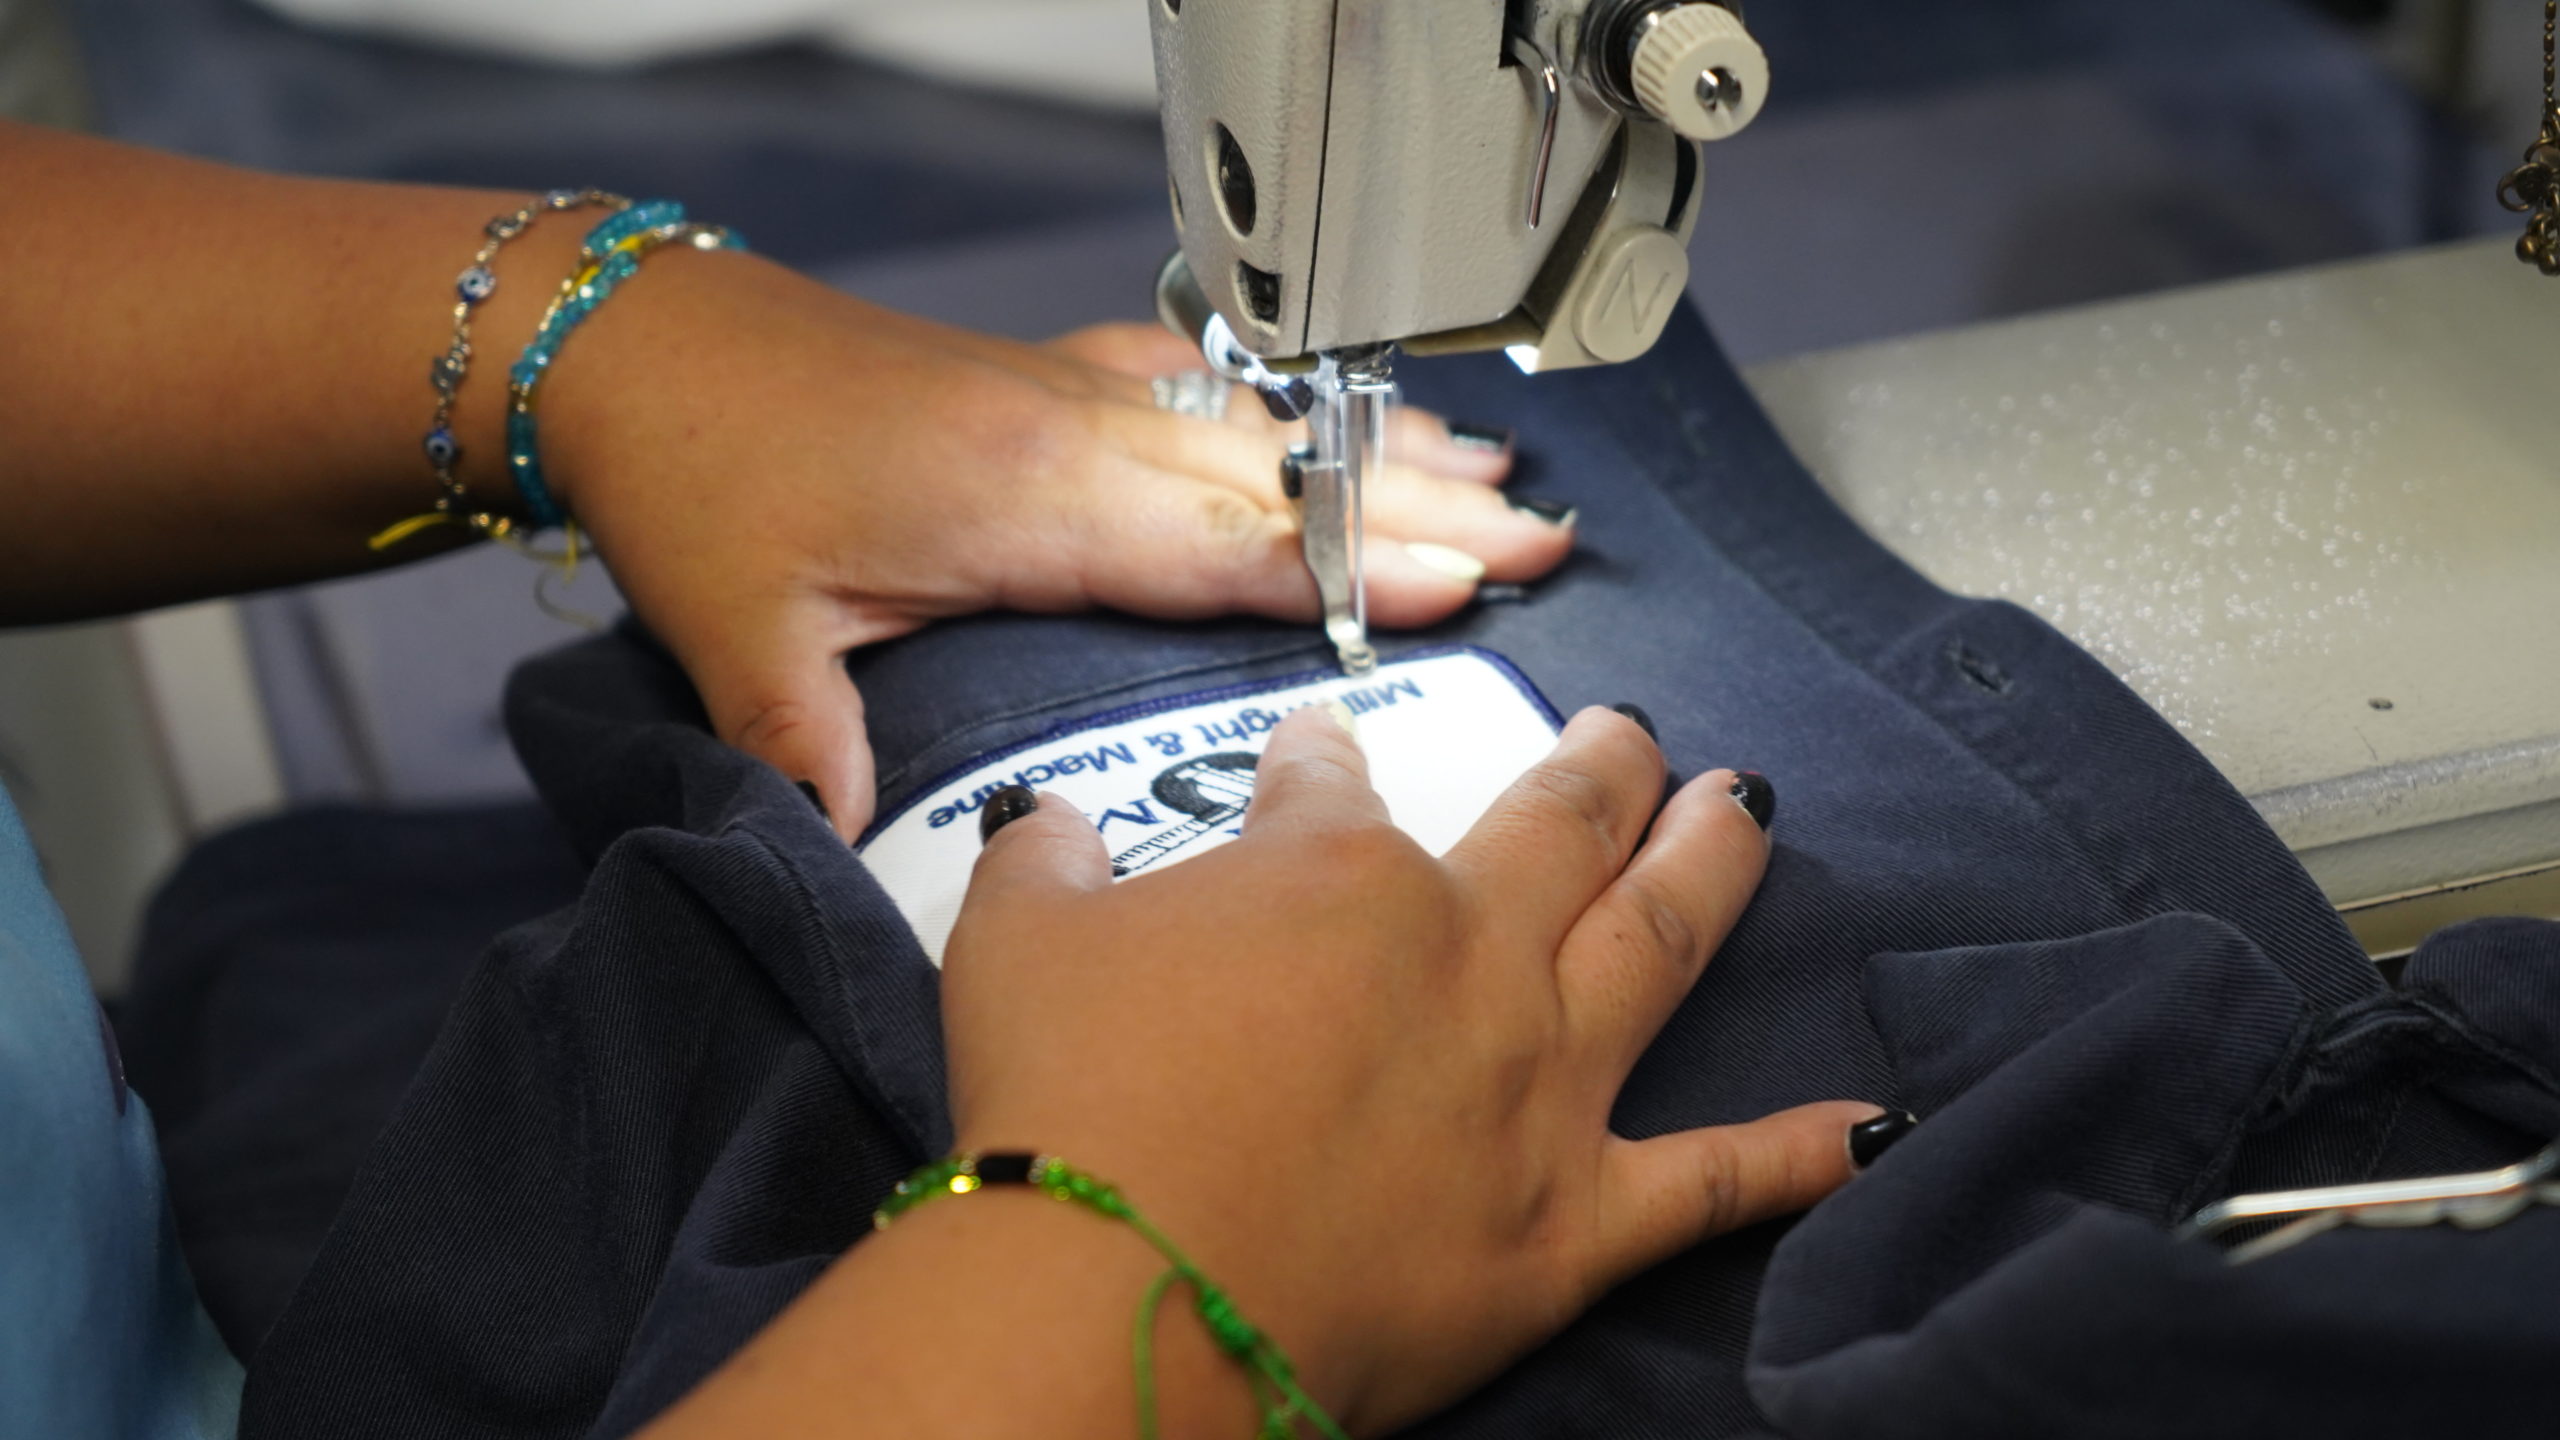 Lechner Services employee sewing a custom logo patch on a shirt